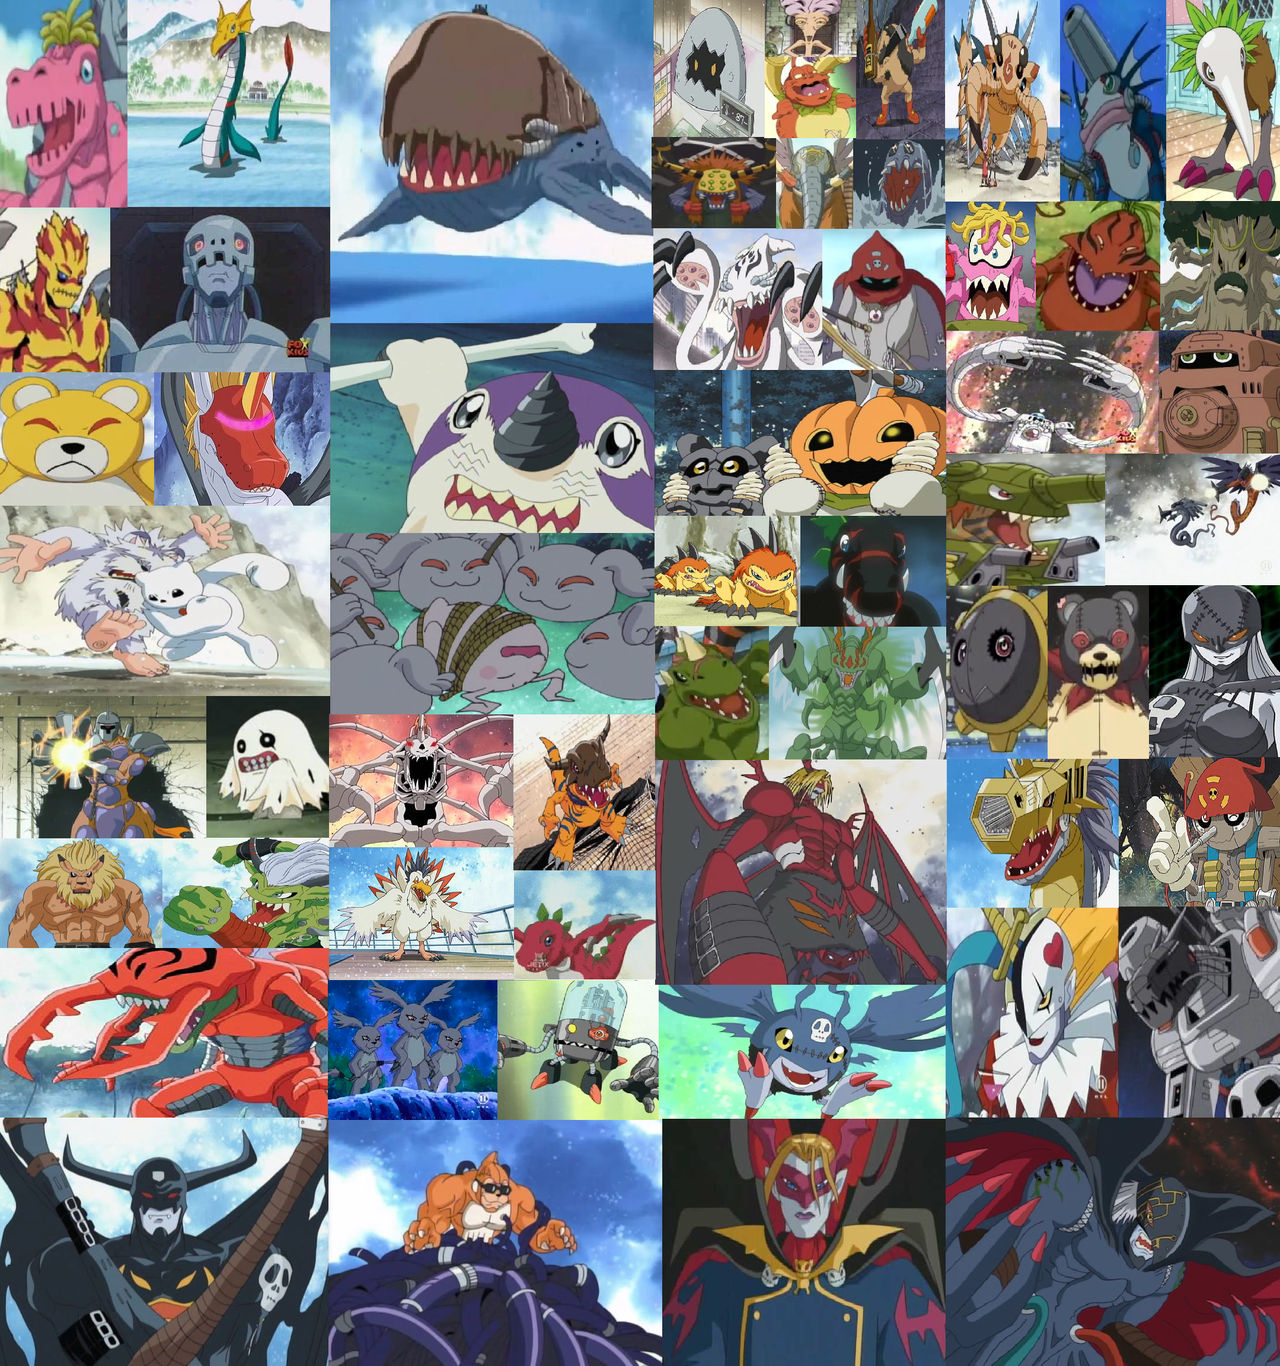 Digimon Adventure Tri All Characters by lalalander199 on DeviantArt